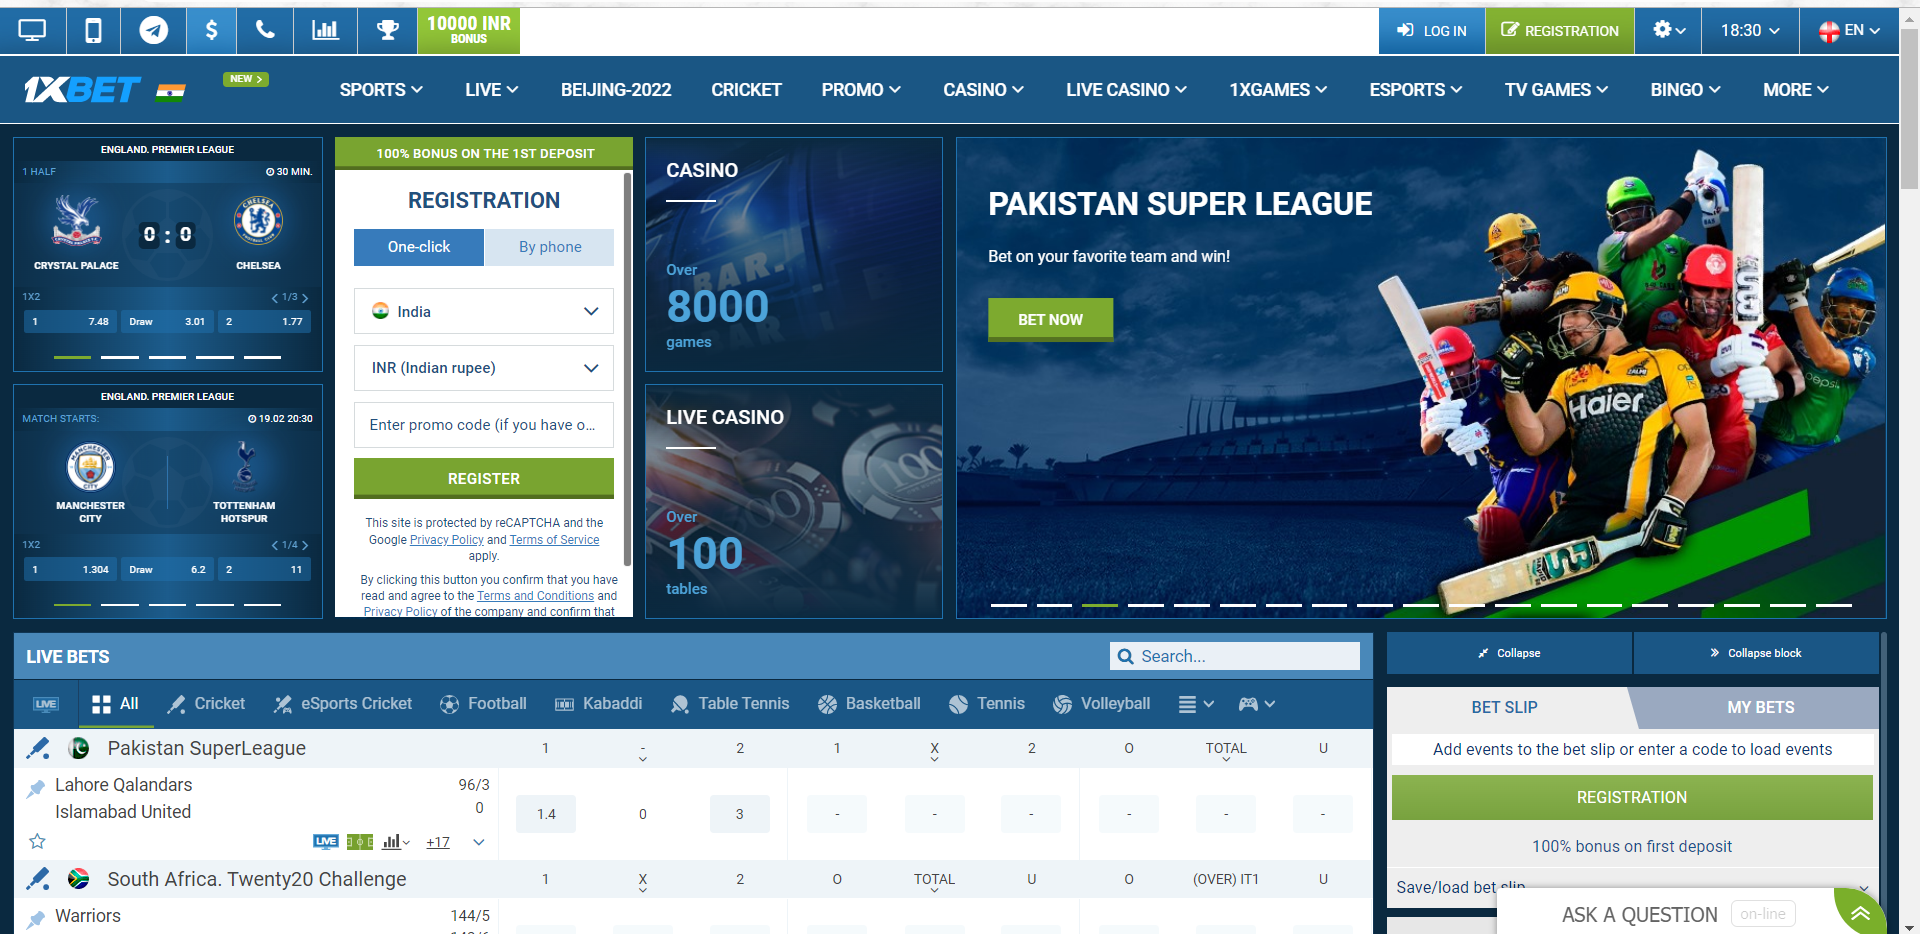 1xBet homepage showing the option for registration, features and the current bets